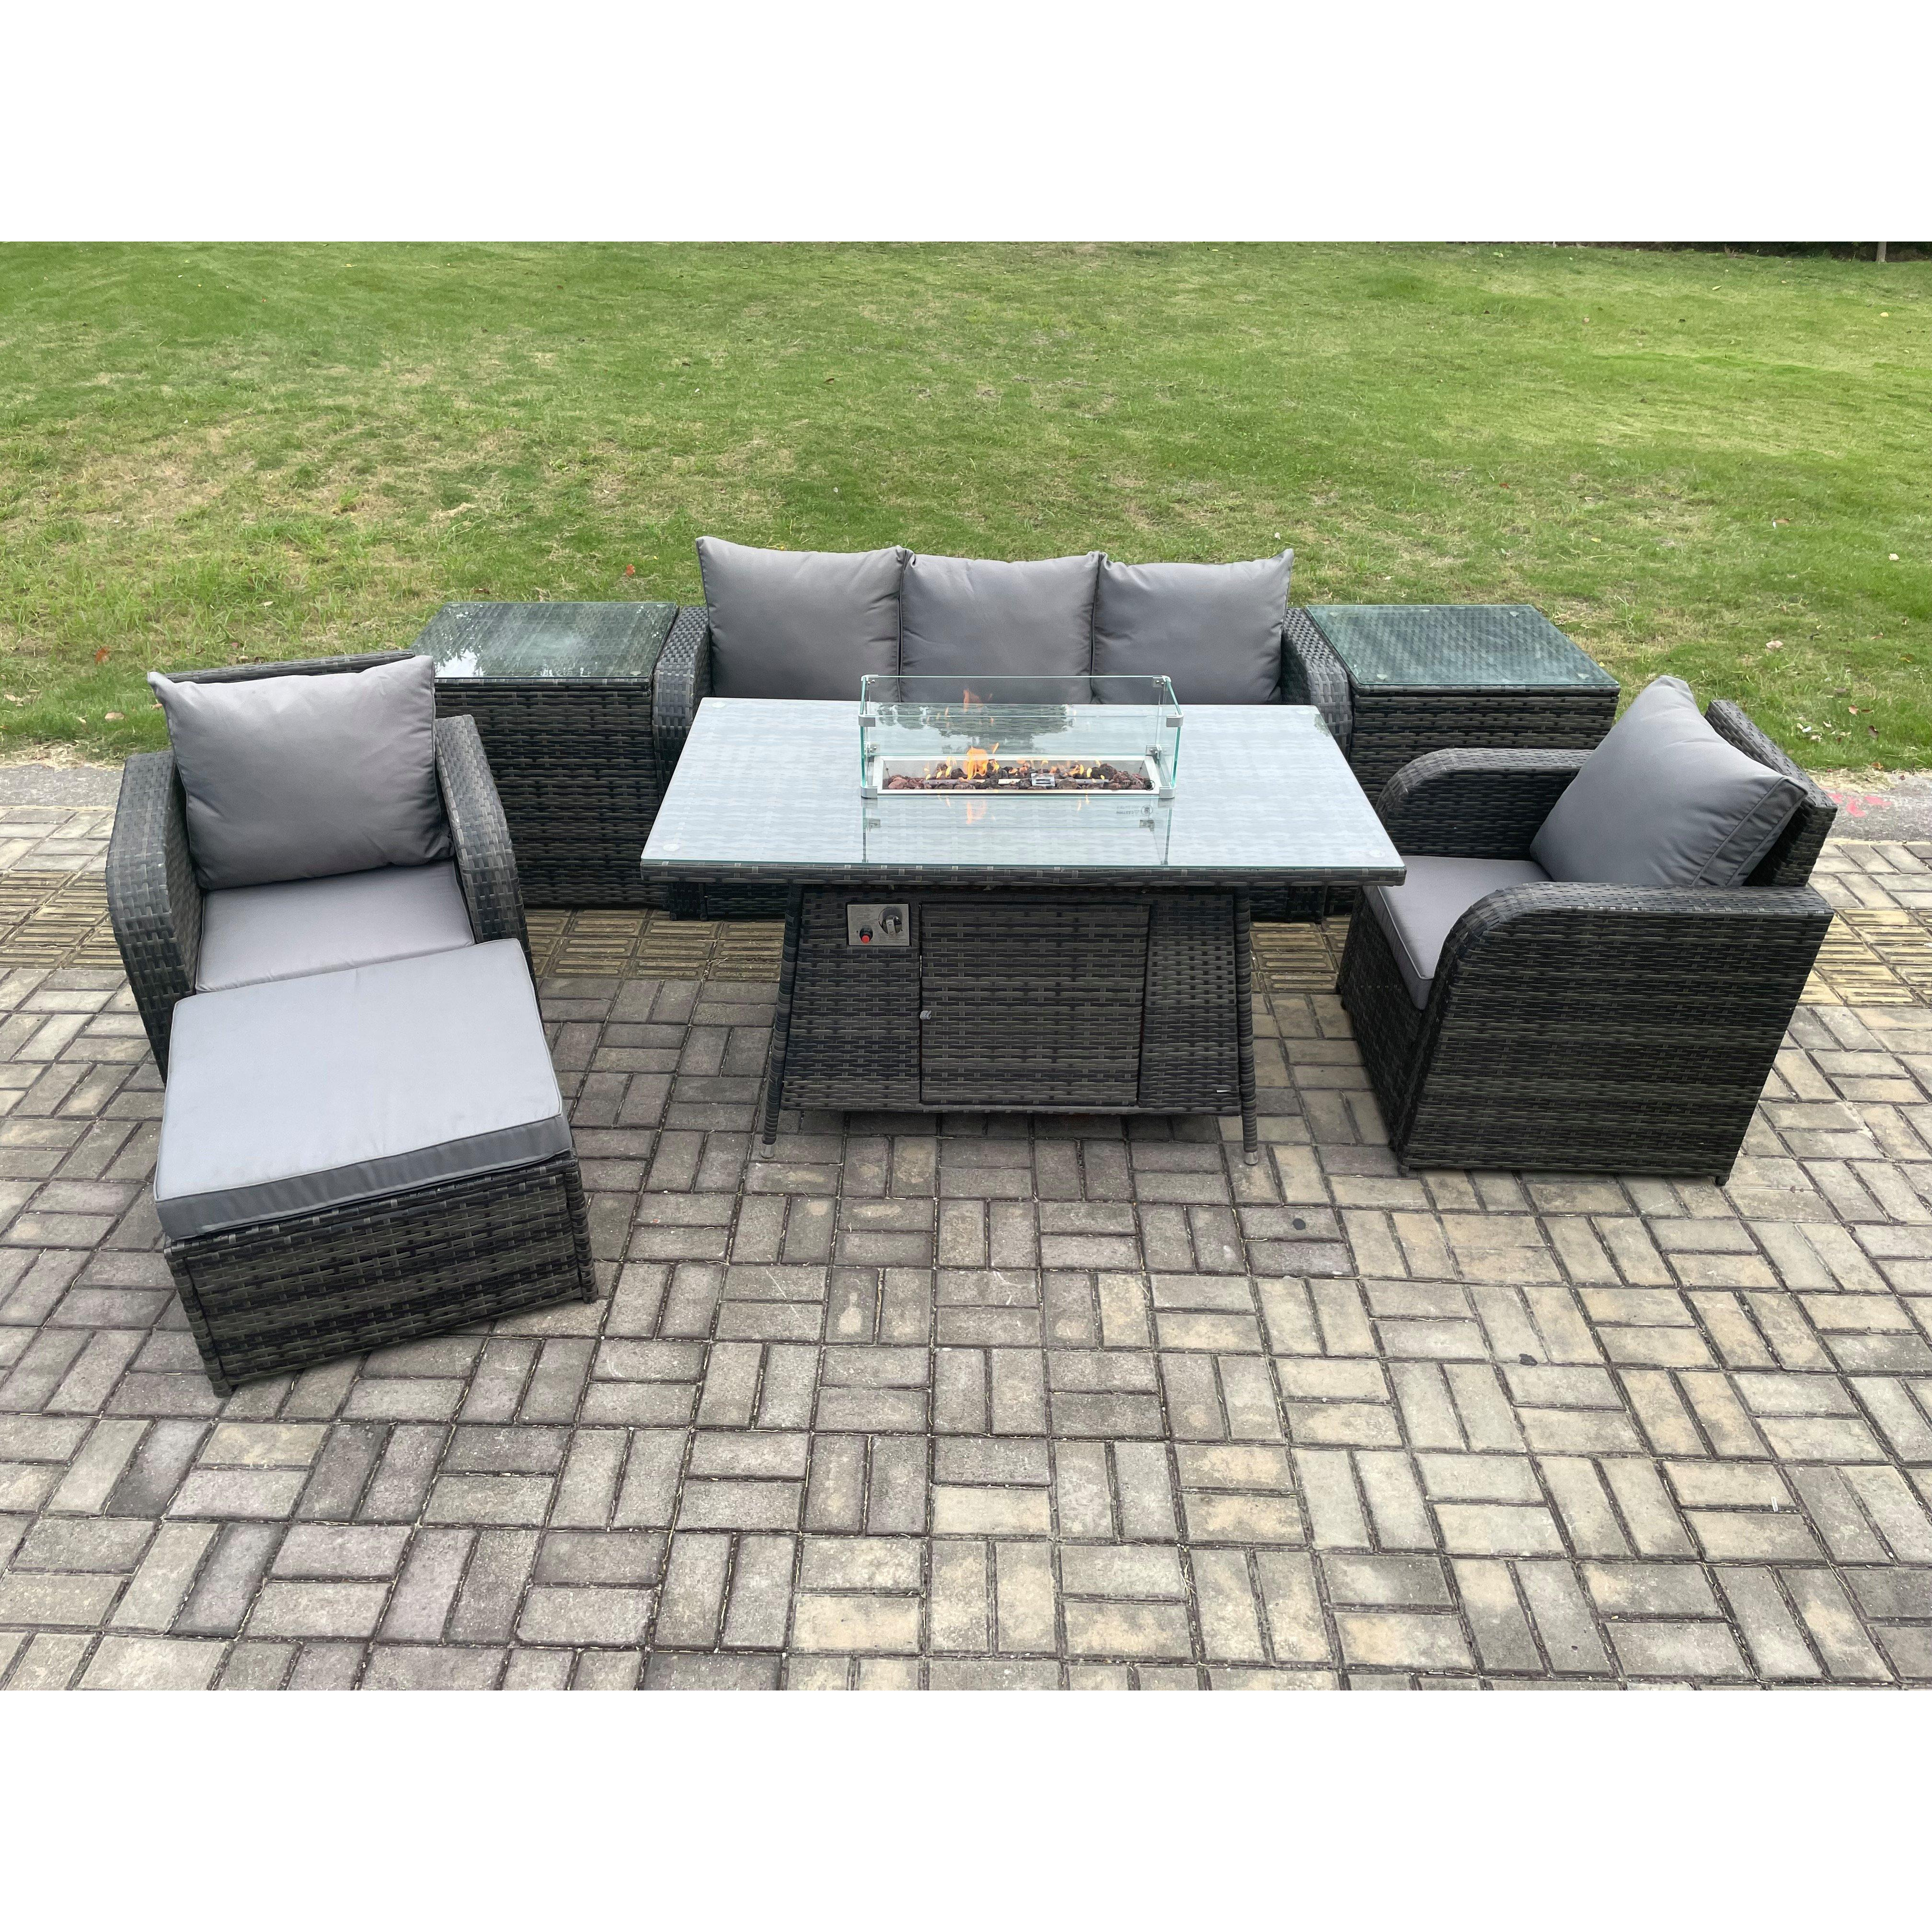 Wicker Rattan Garden Furniture Sofa Set Gas Fire Pit Dining Table Indoor Outdoor with 2 Side Tables Chair Footstool - image 1